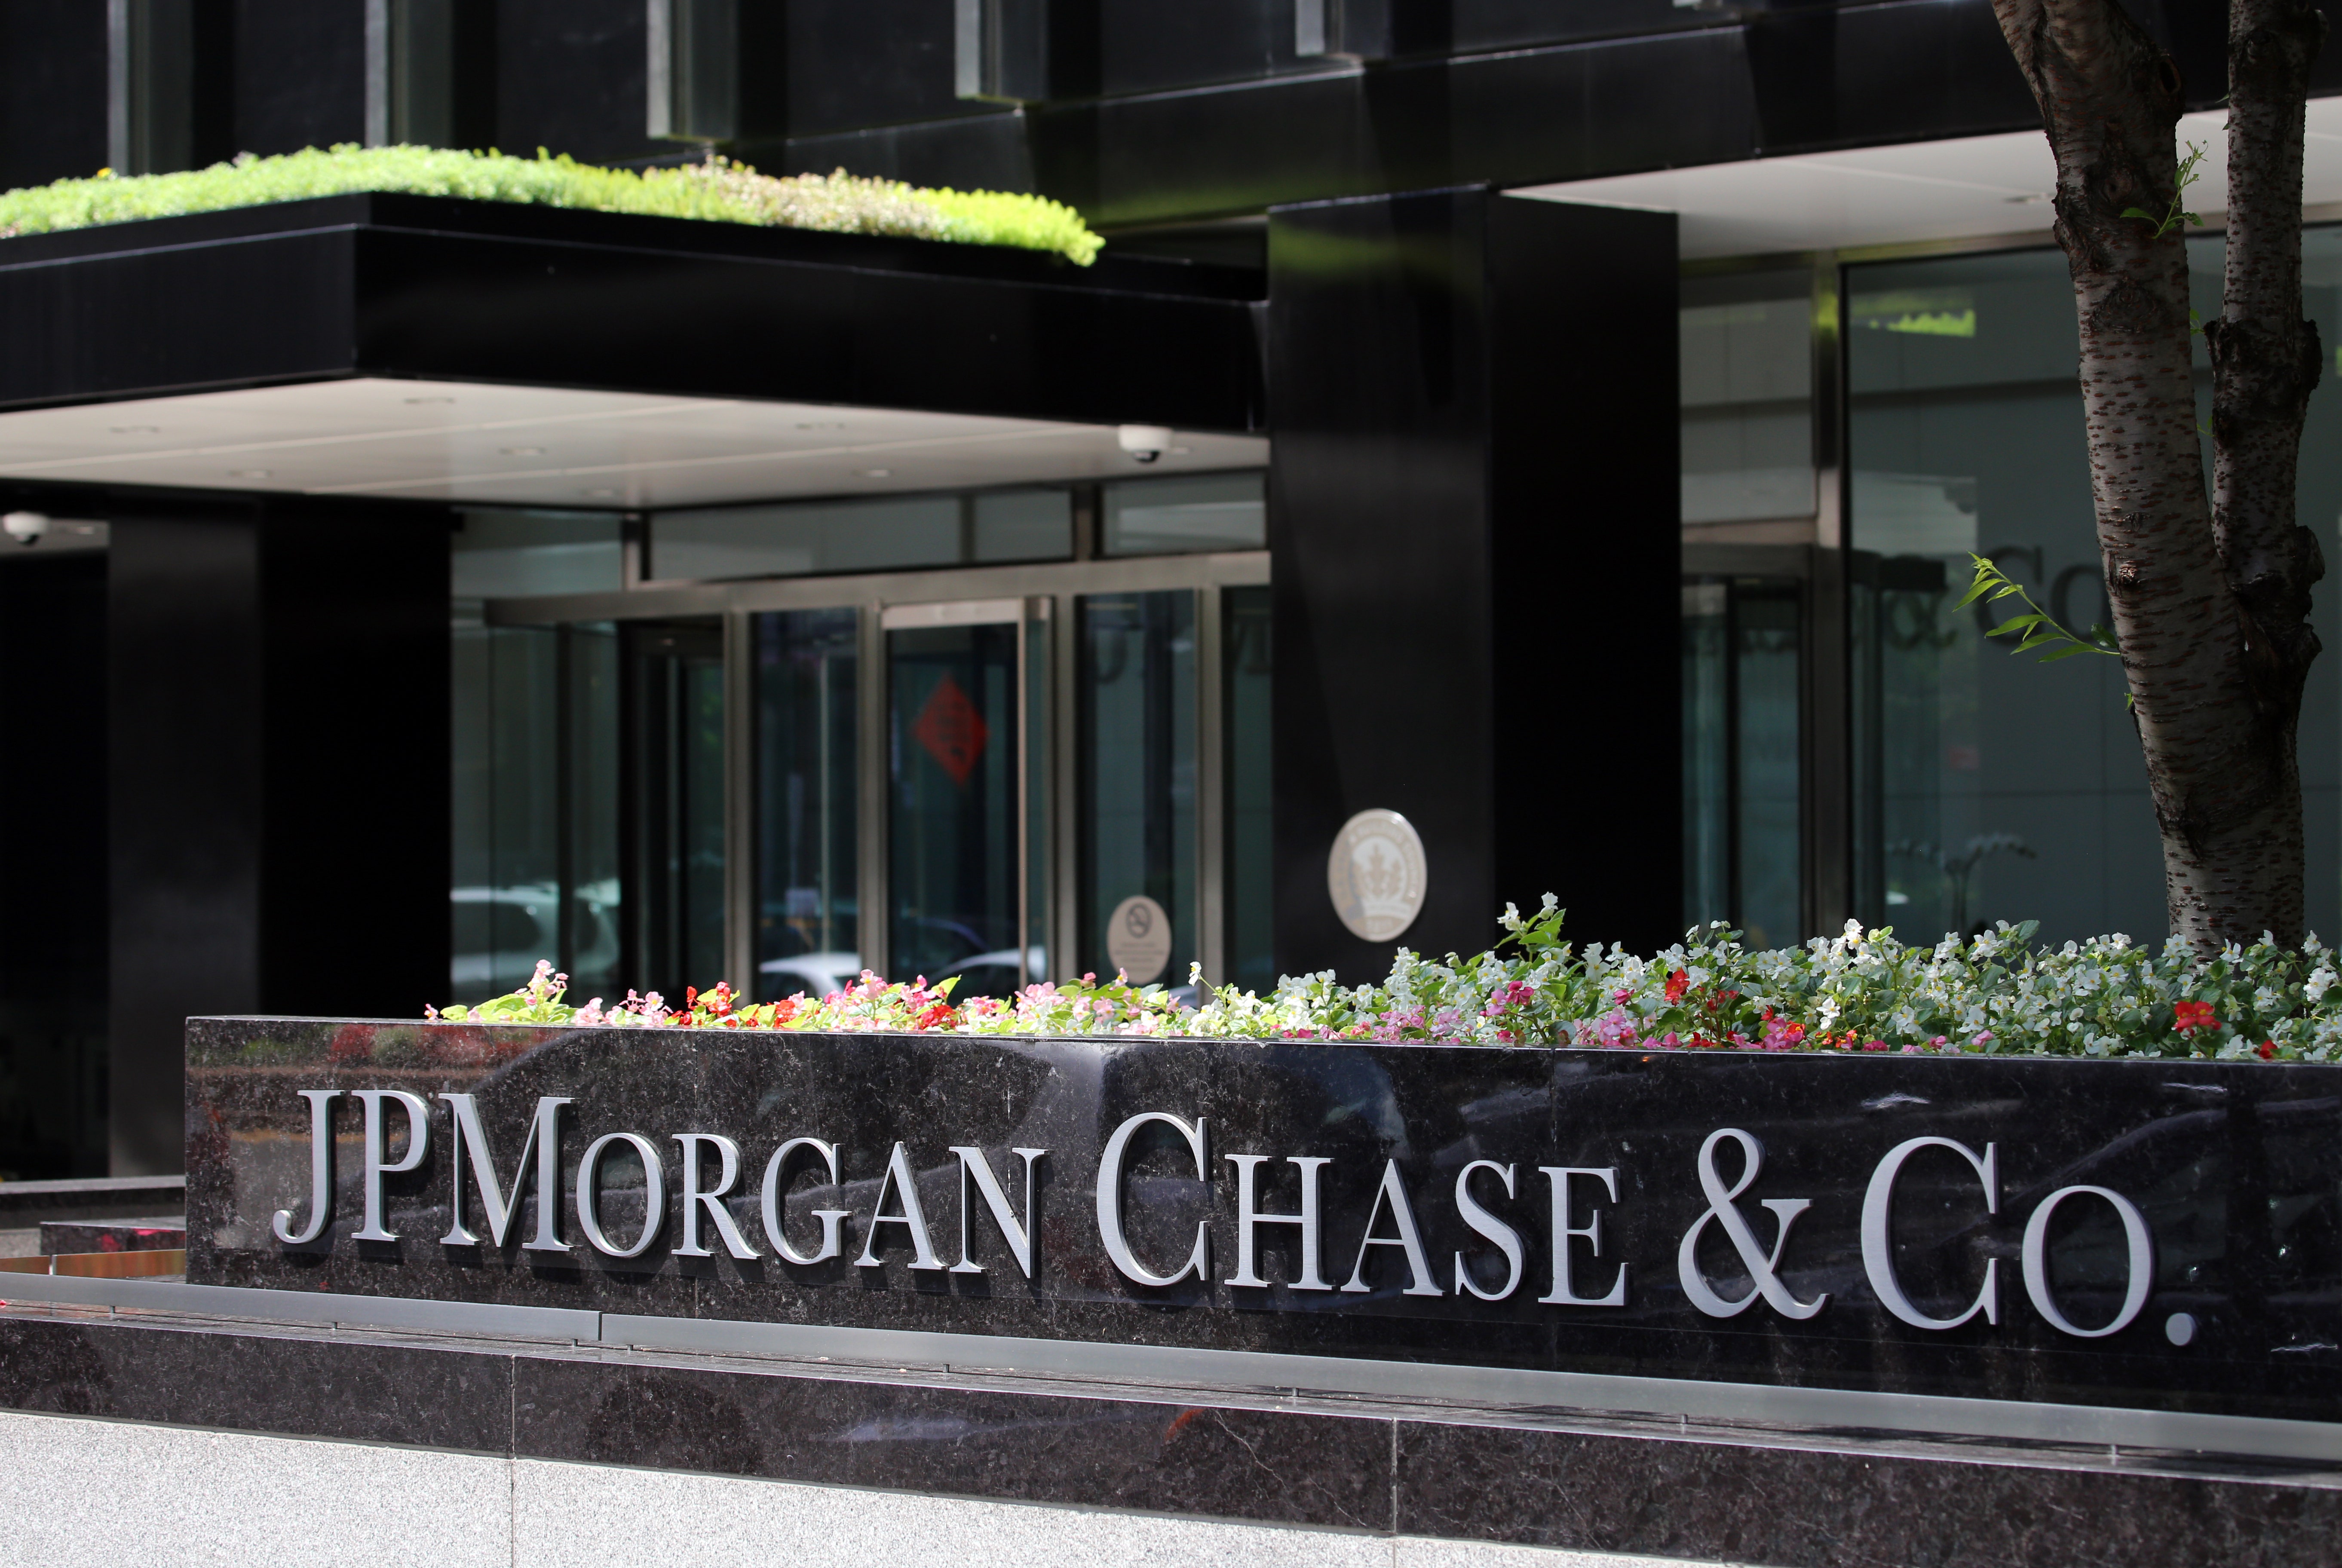 Why These 4 Analysts Have Different Takes On JPMorgan Chase's Q2 Results